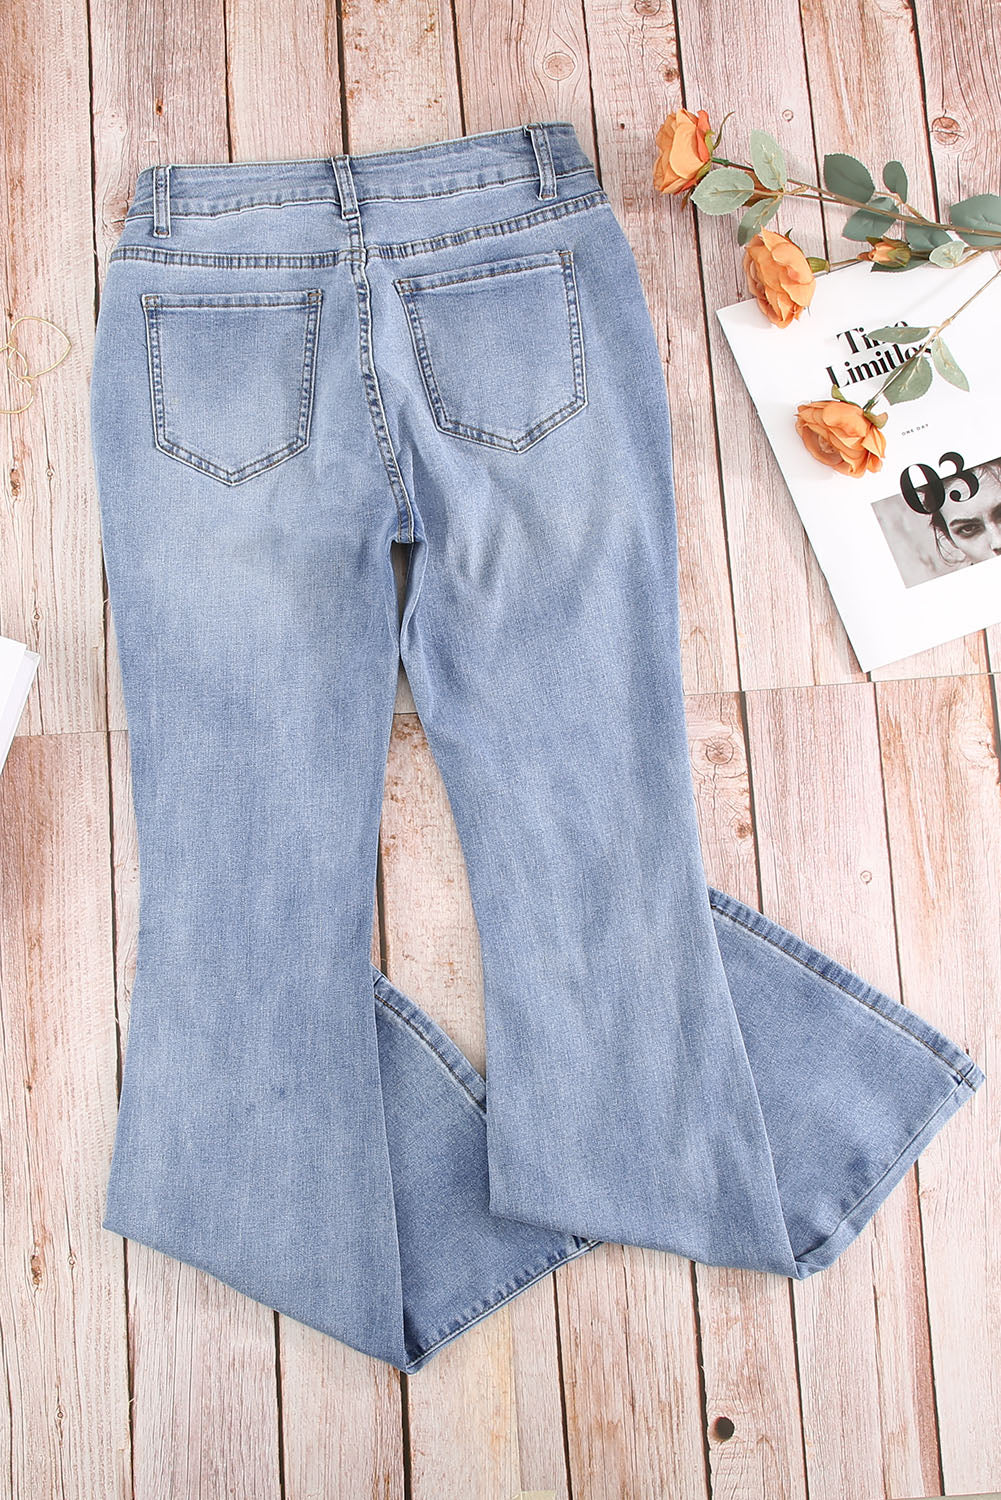 Distressed Flare Jeans with Pockets